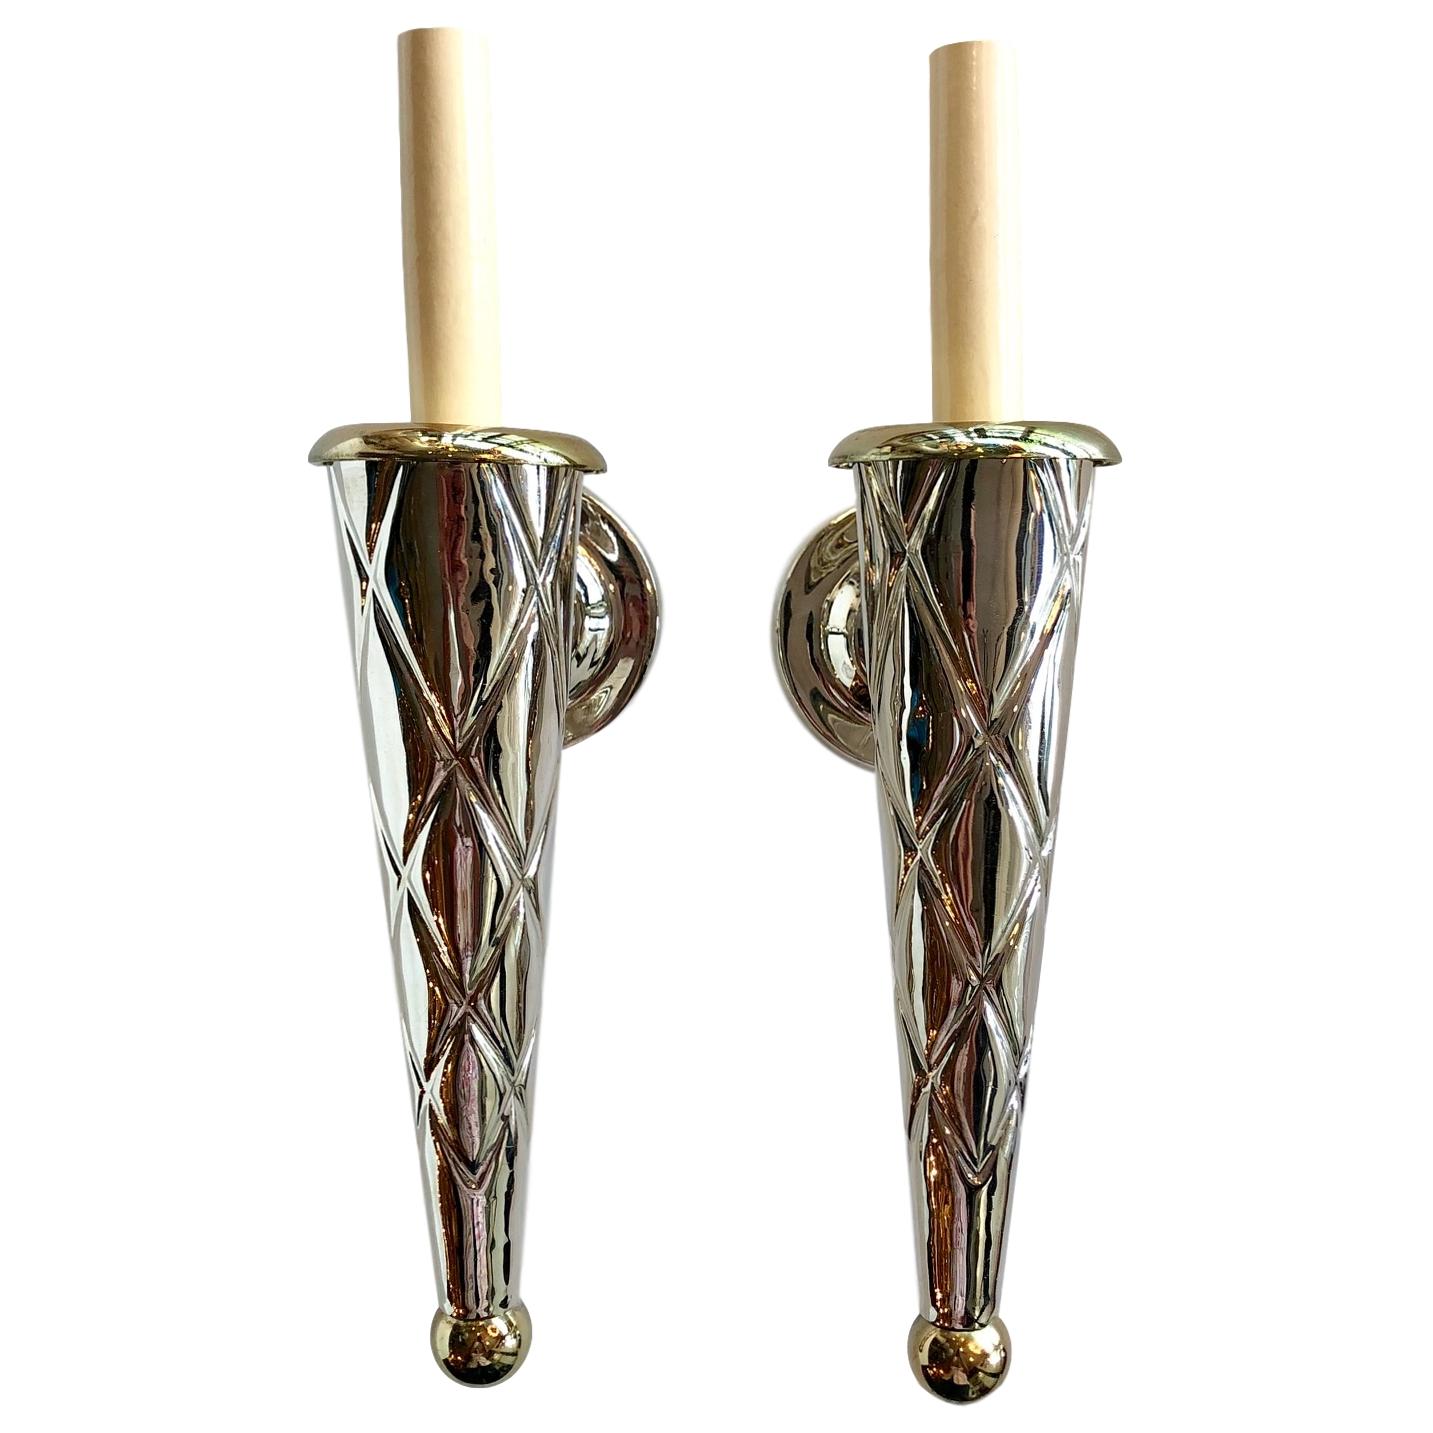 Set of 4 Italian Moderne style nickel plated and brass sconces. 

Measurements:
14